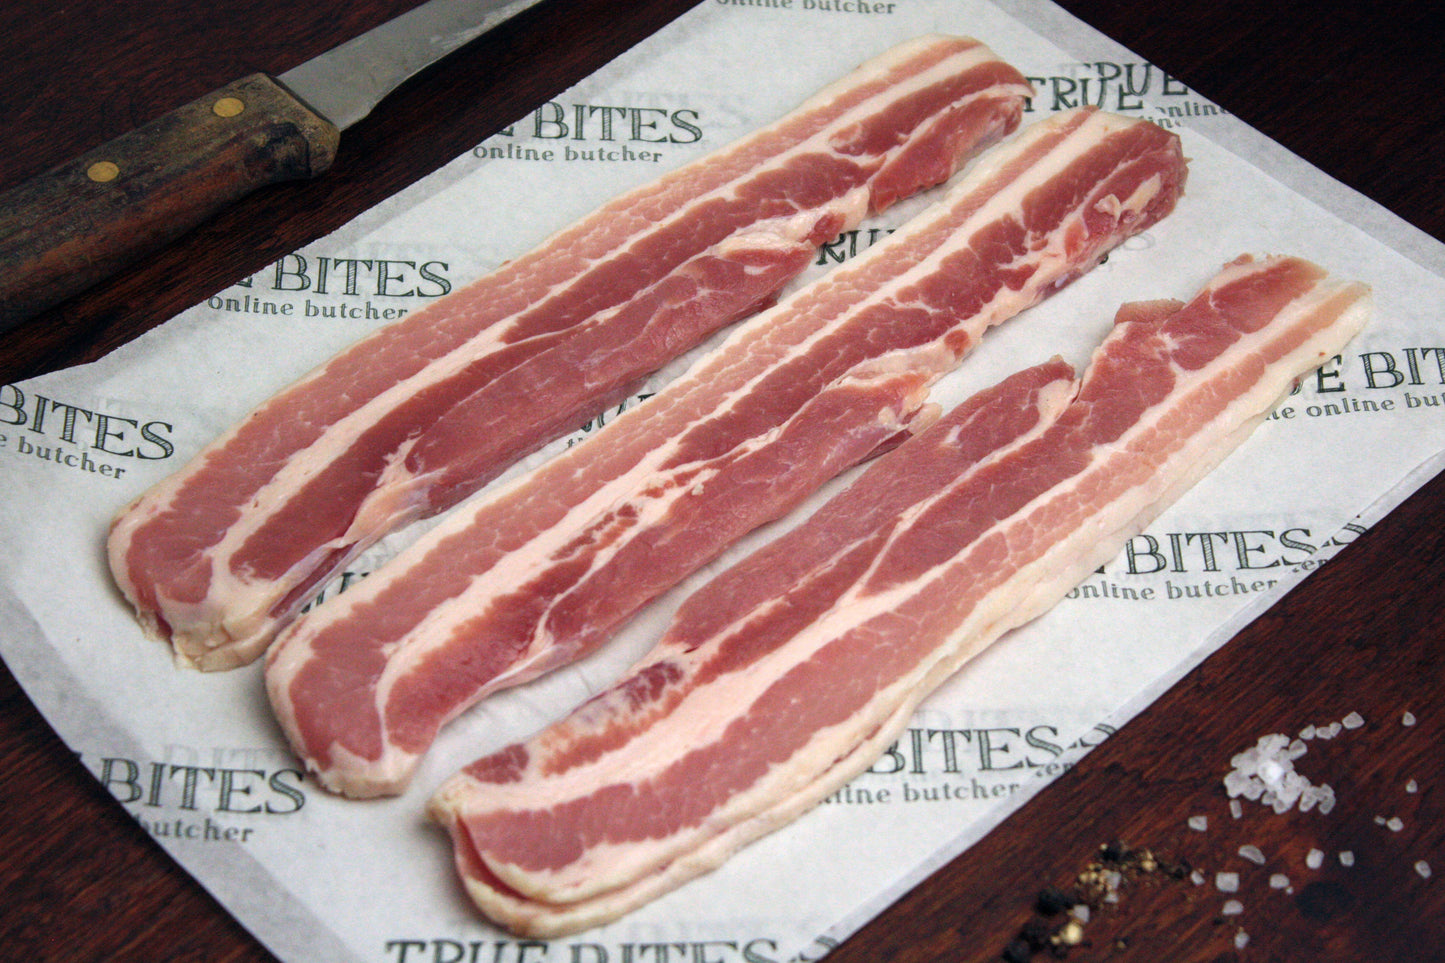 raw dry cured streaky bacon displayed on true bites branded greaseproof paper